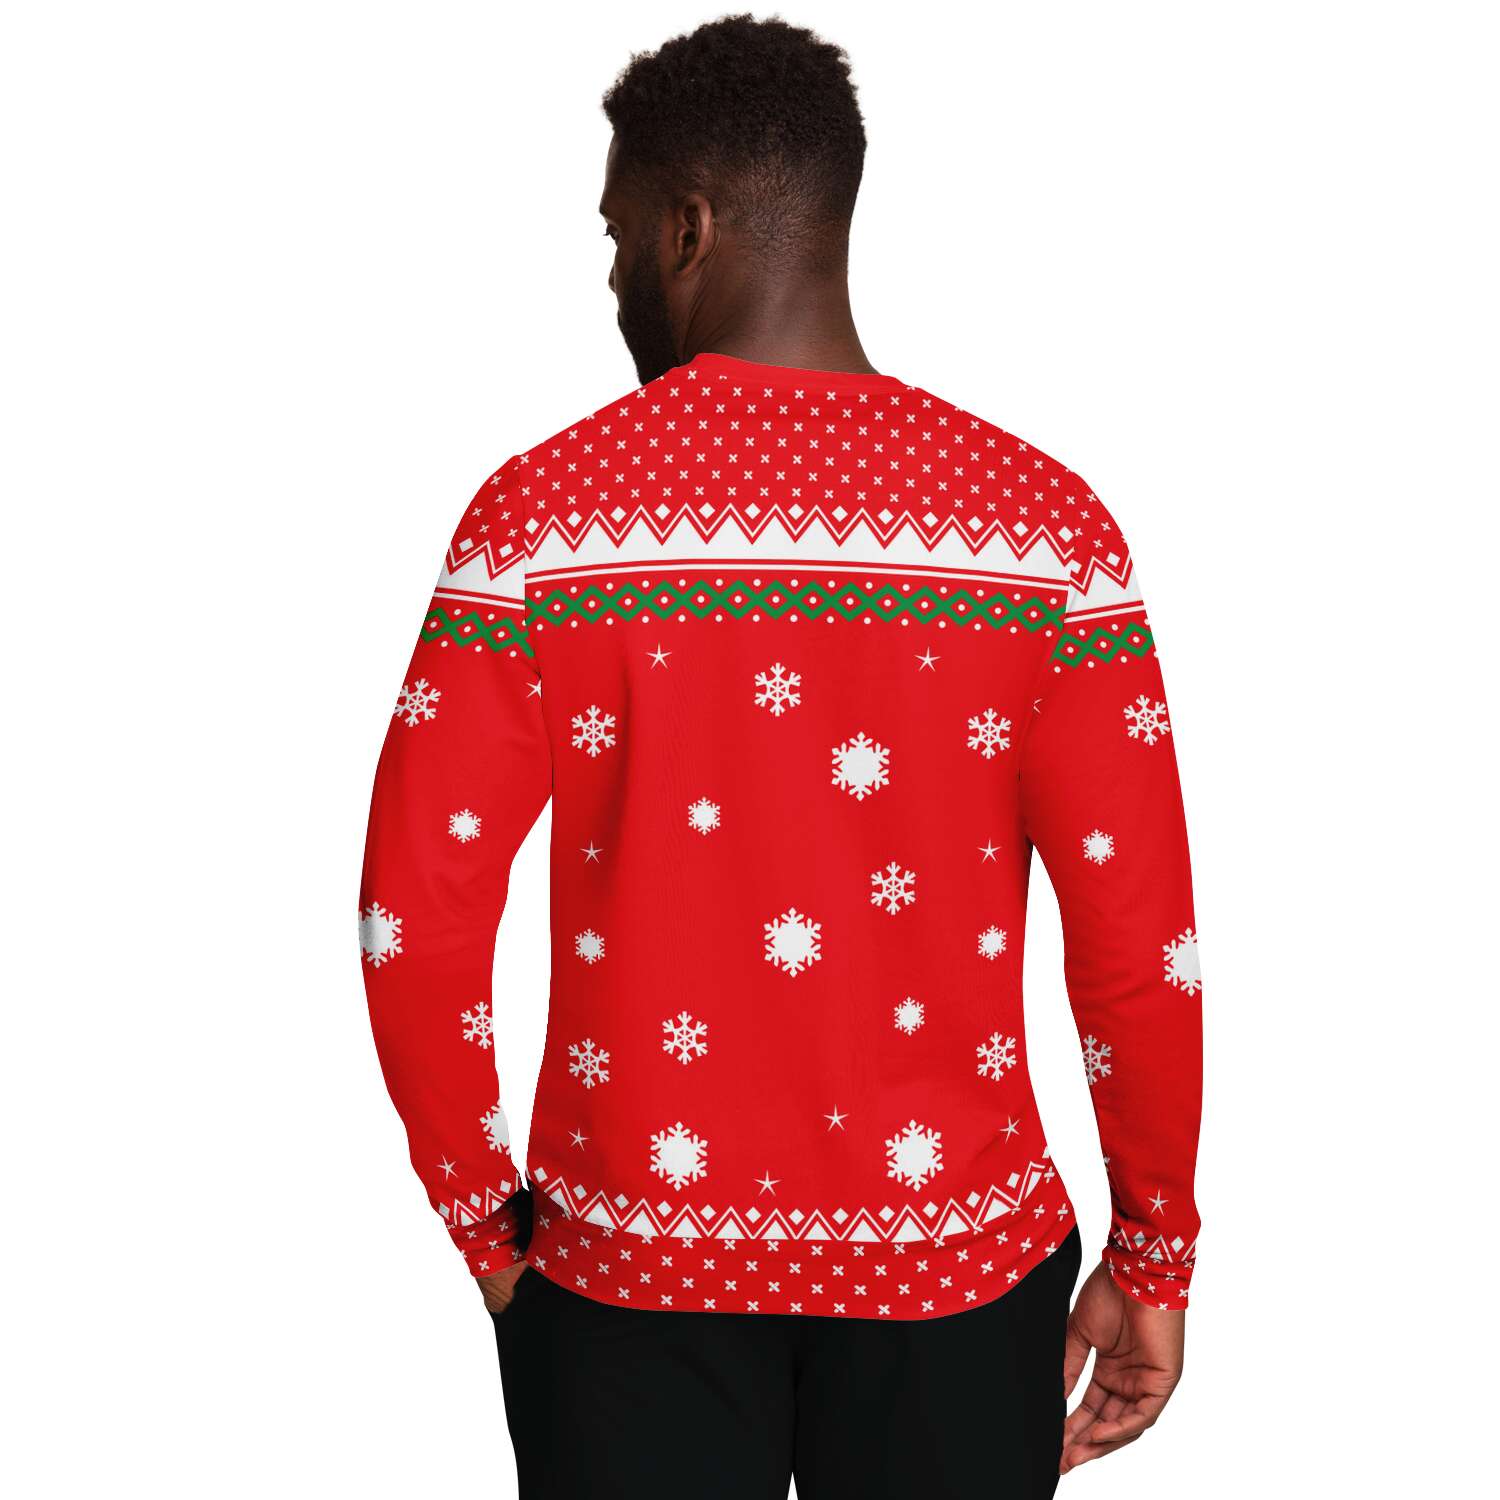 Credit Card Ugly Christmas Sweater - Rave bonfire